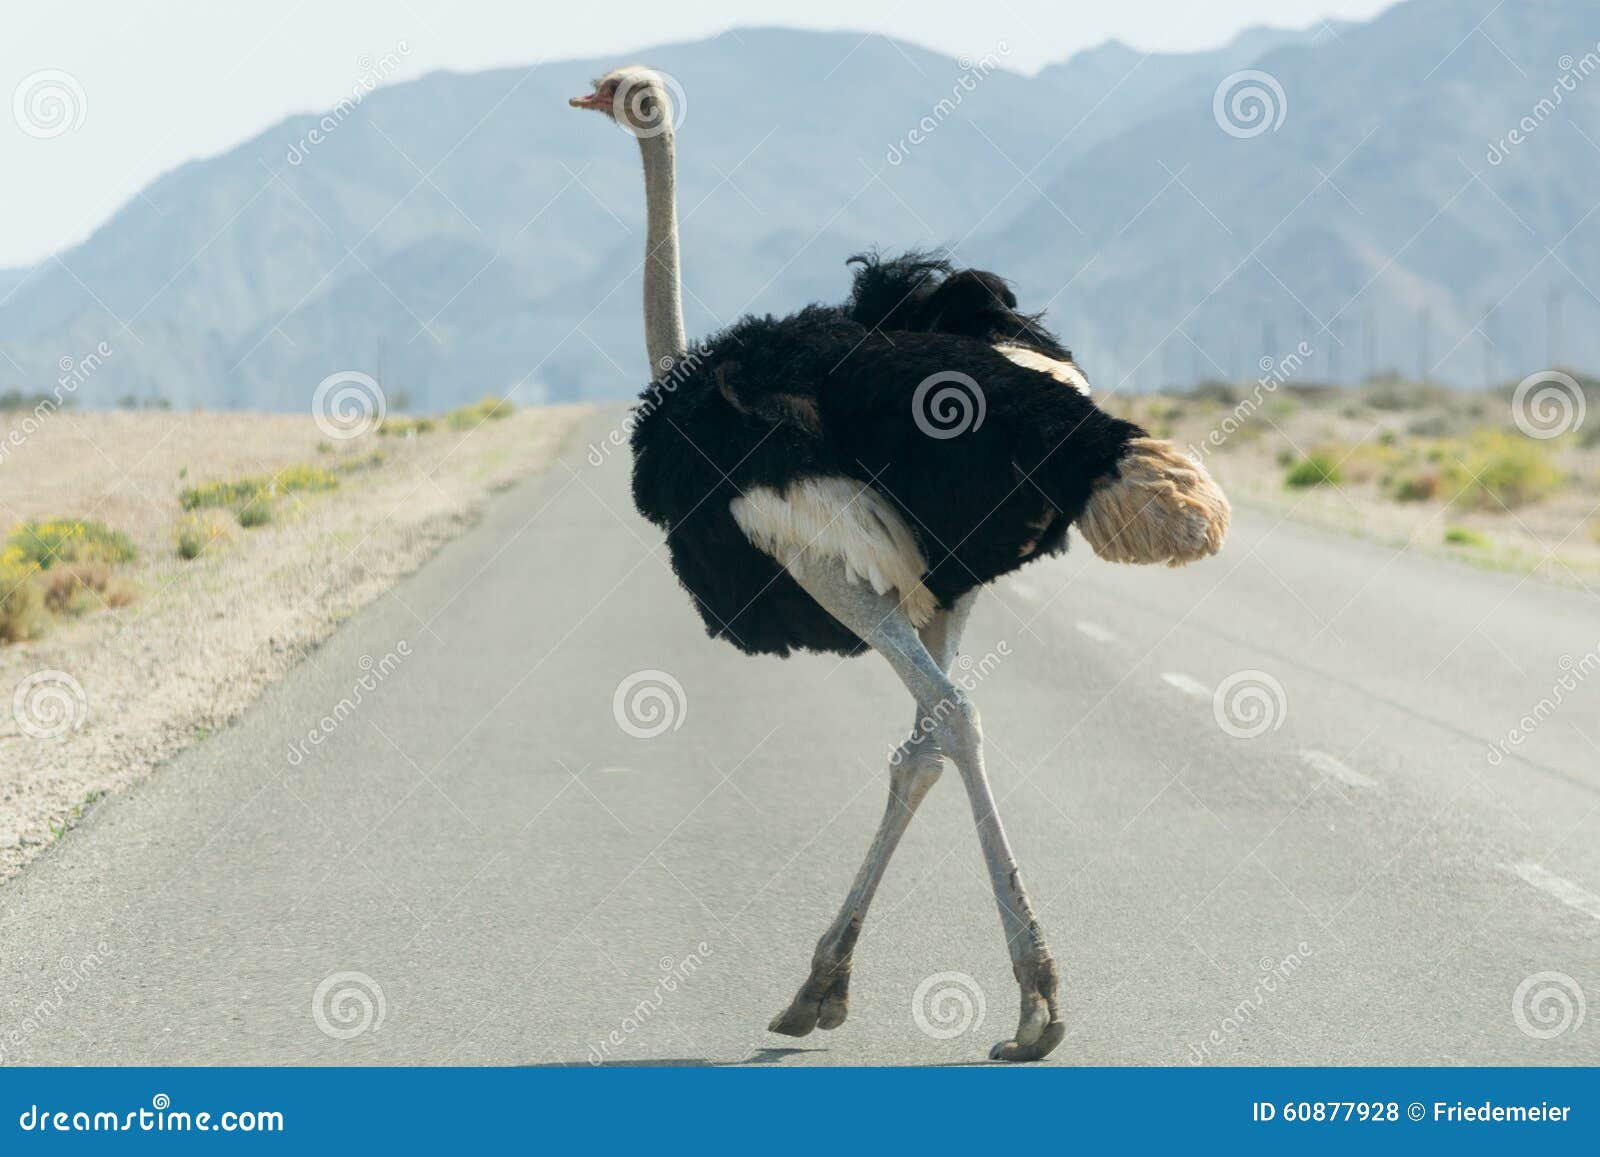 Ostrich Crossing A Tared Road. Stock Photo - Image of ...